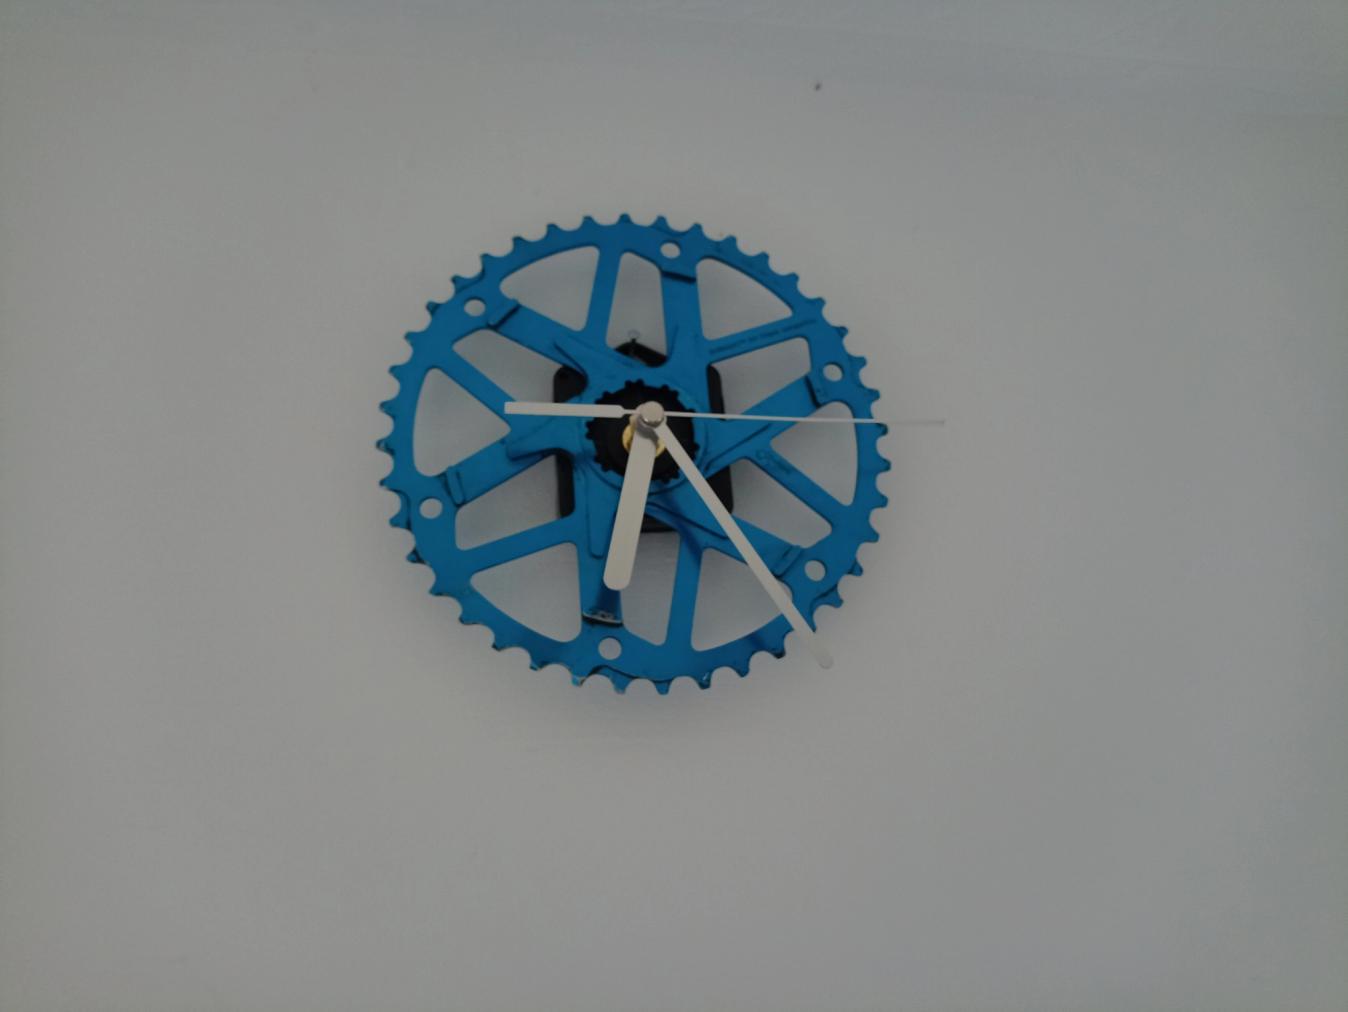 large sprocket turned into a clock